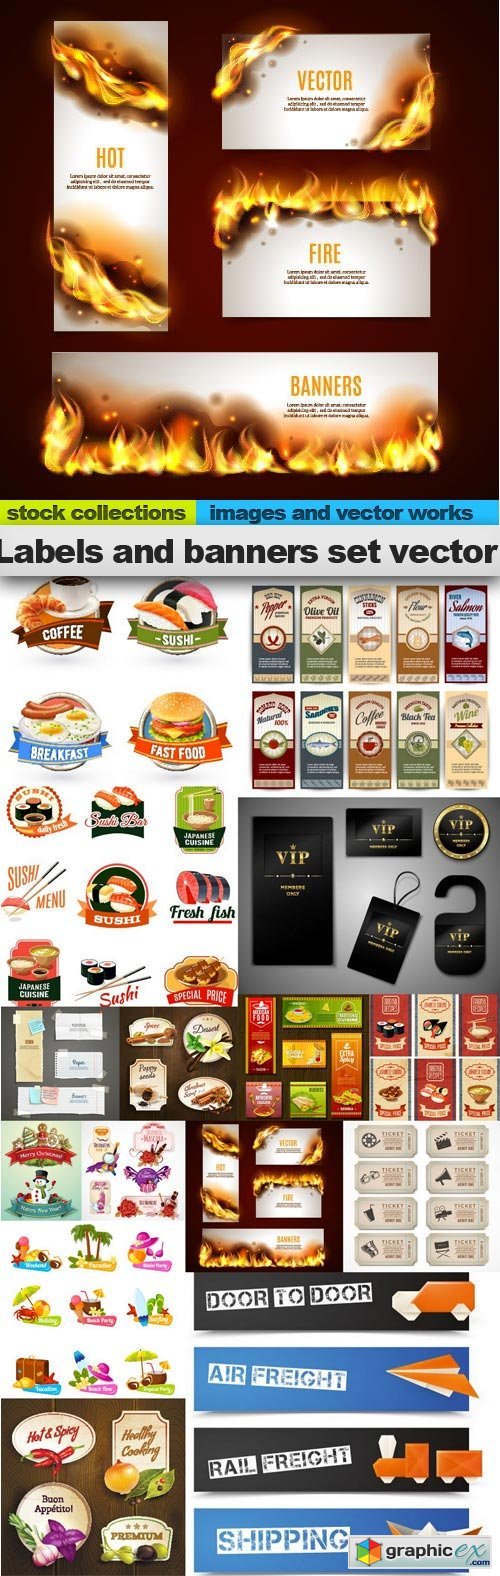 Labels and banners set vector, 15 xEPS